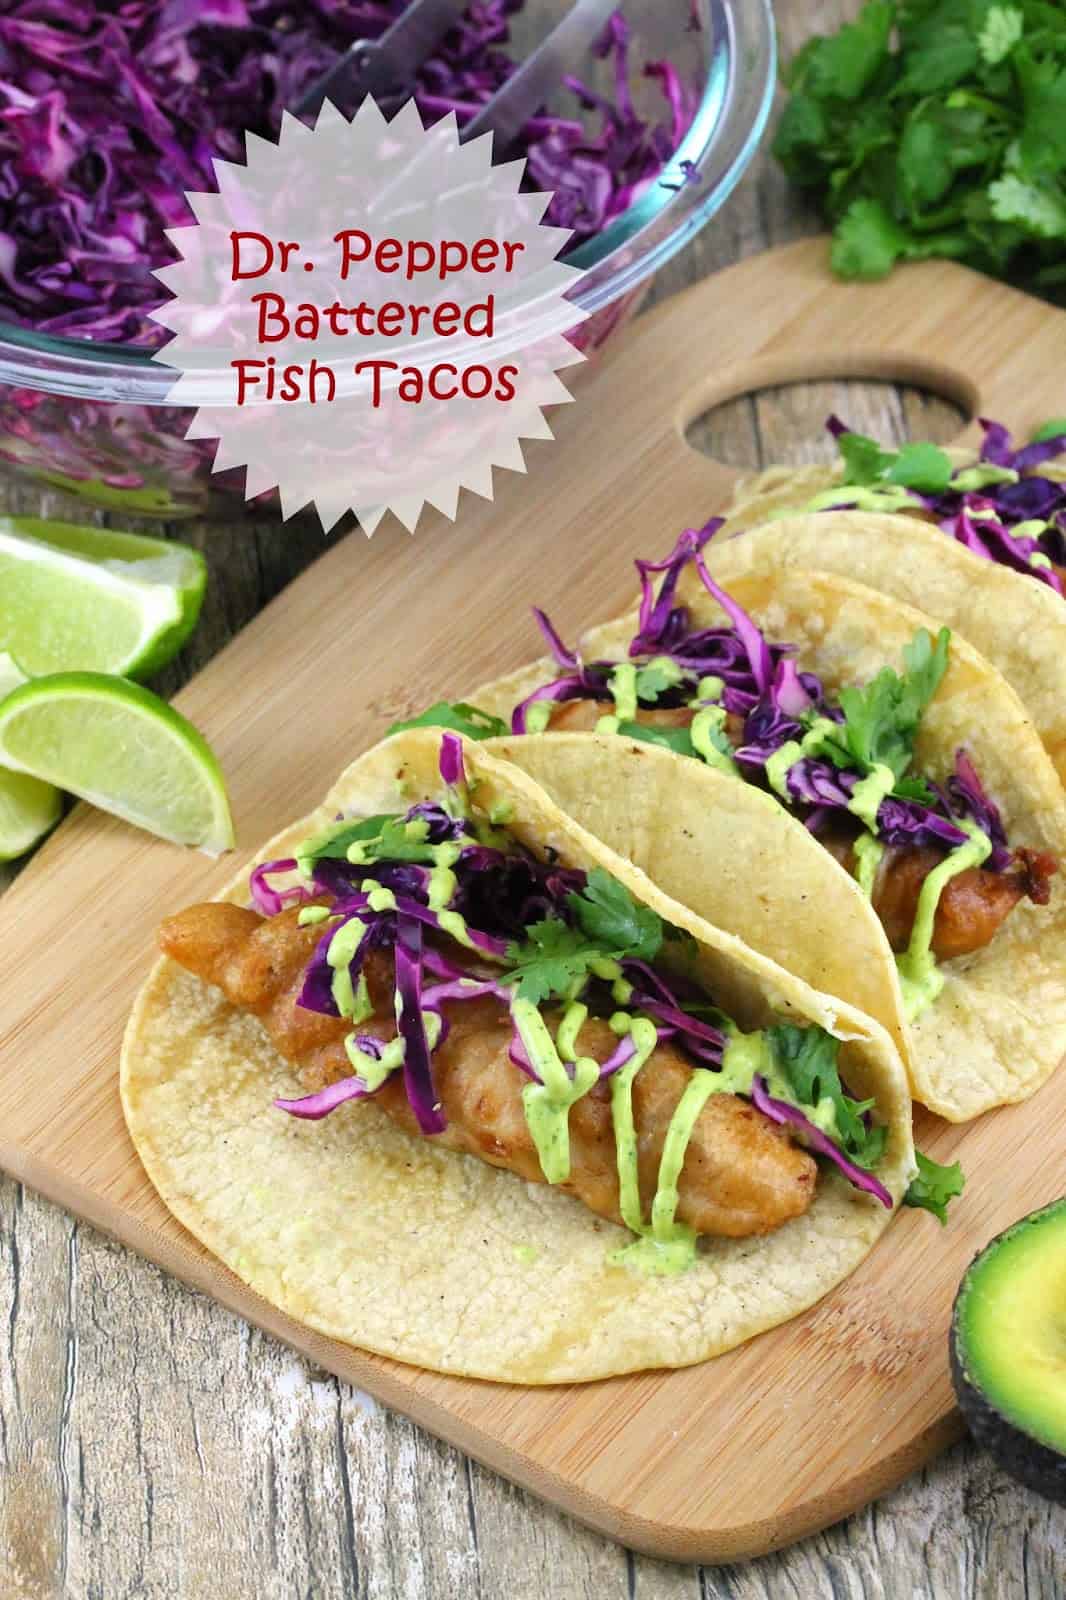 Dr. Pepper Battered Fish Tacos: Dr. Pepper battered fish is wrapped in warm corn tortillas and topped with fresh cabbage slaw, avocado crema and garnished with cilantro and lime wedges.